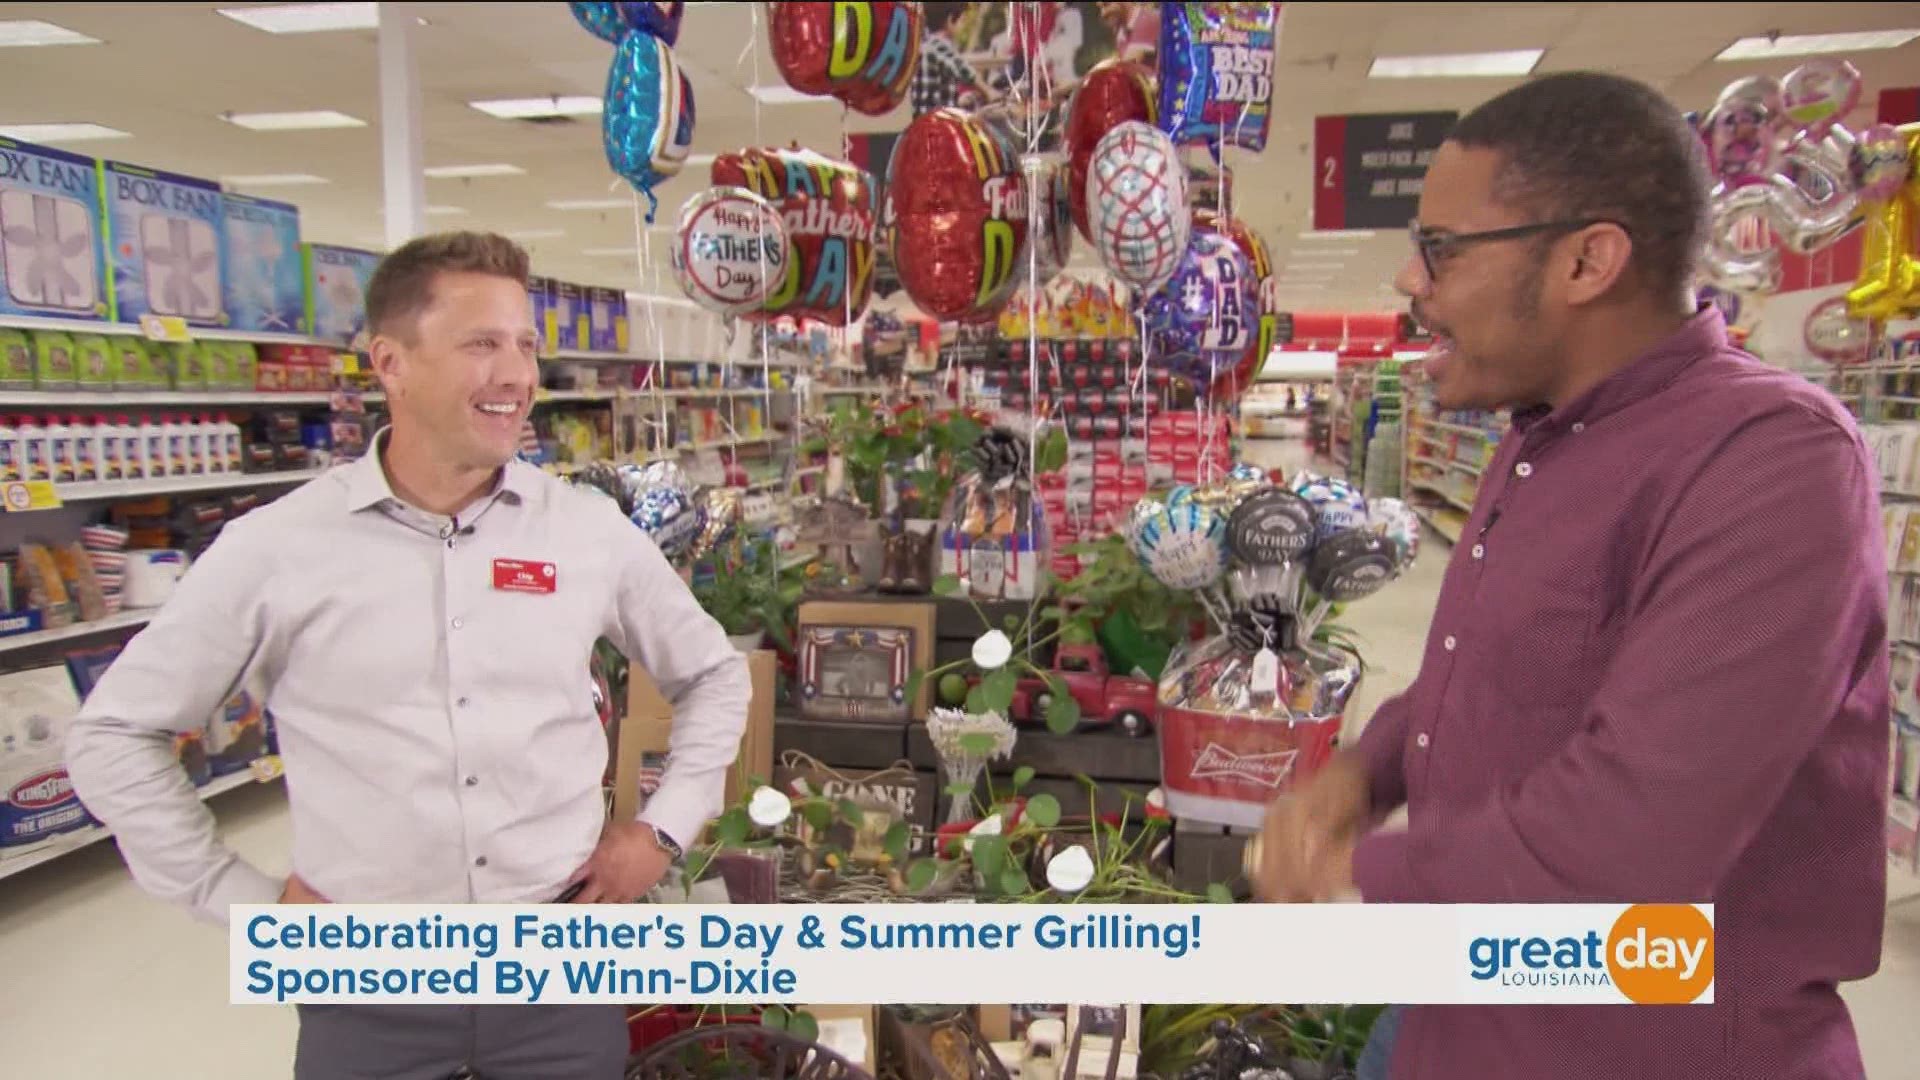 Winn-Dixie has all of your grilling needs for Father's Day and all summer long!